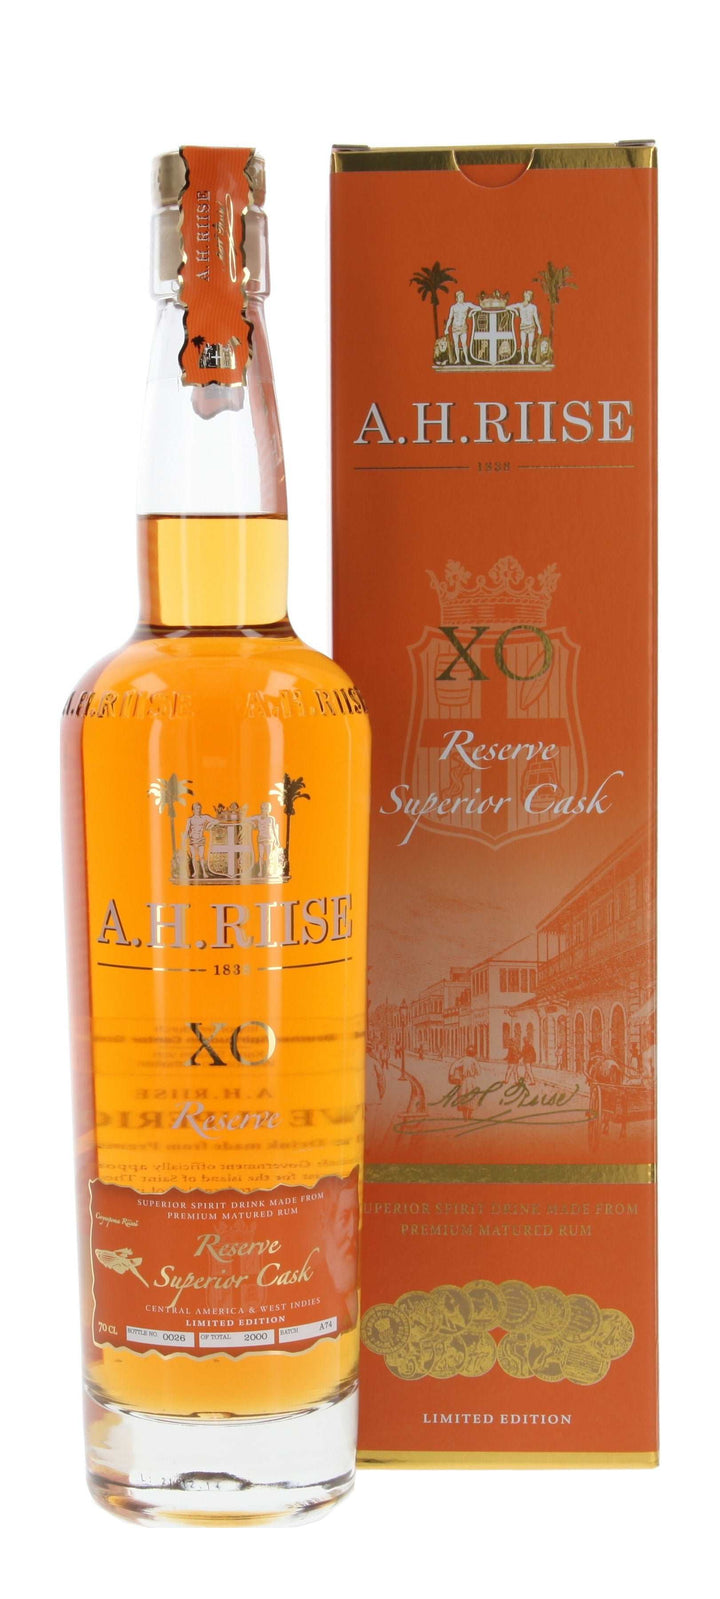 A.H. Riise Rum XO Reserve Superior Cask - 0.7l Flasche - TRY IT! Tastings